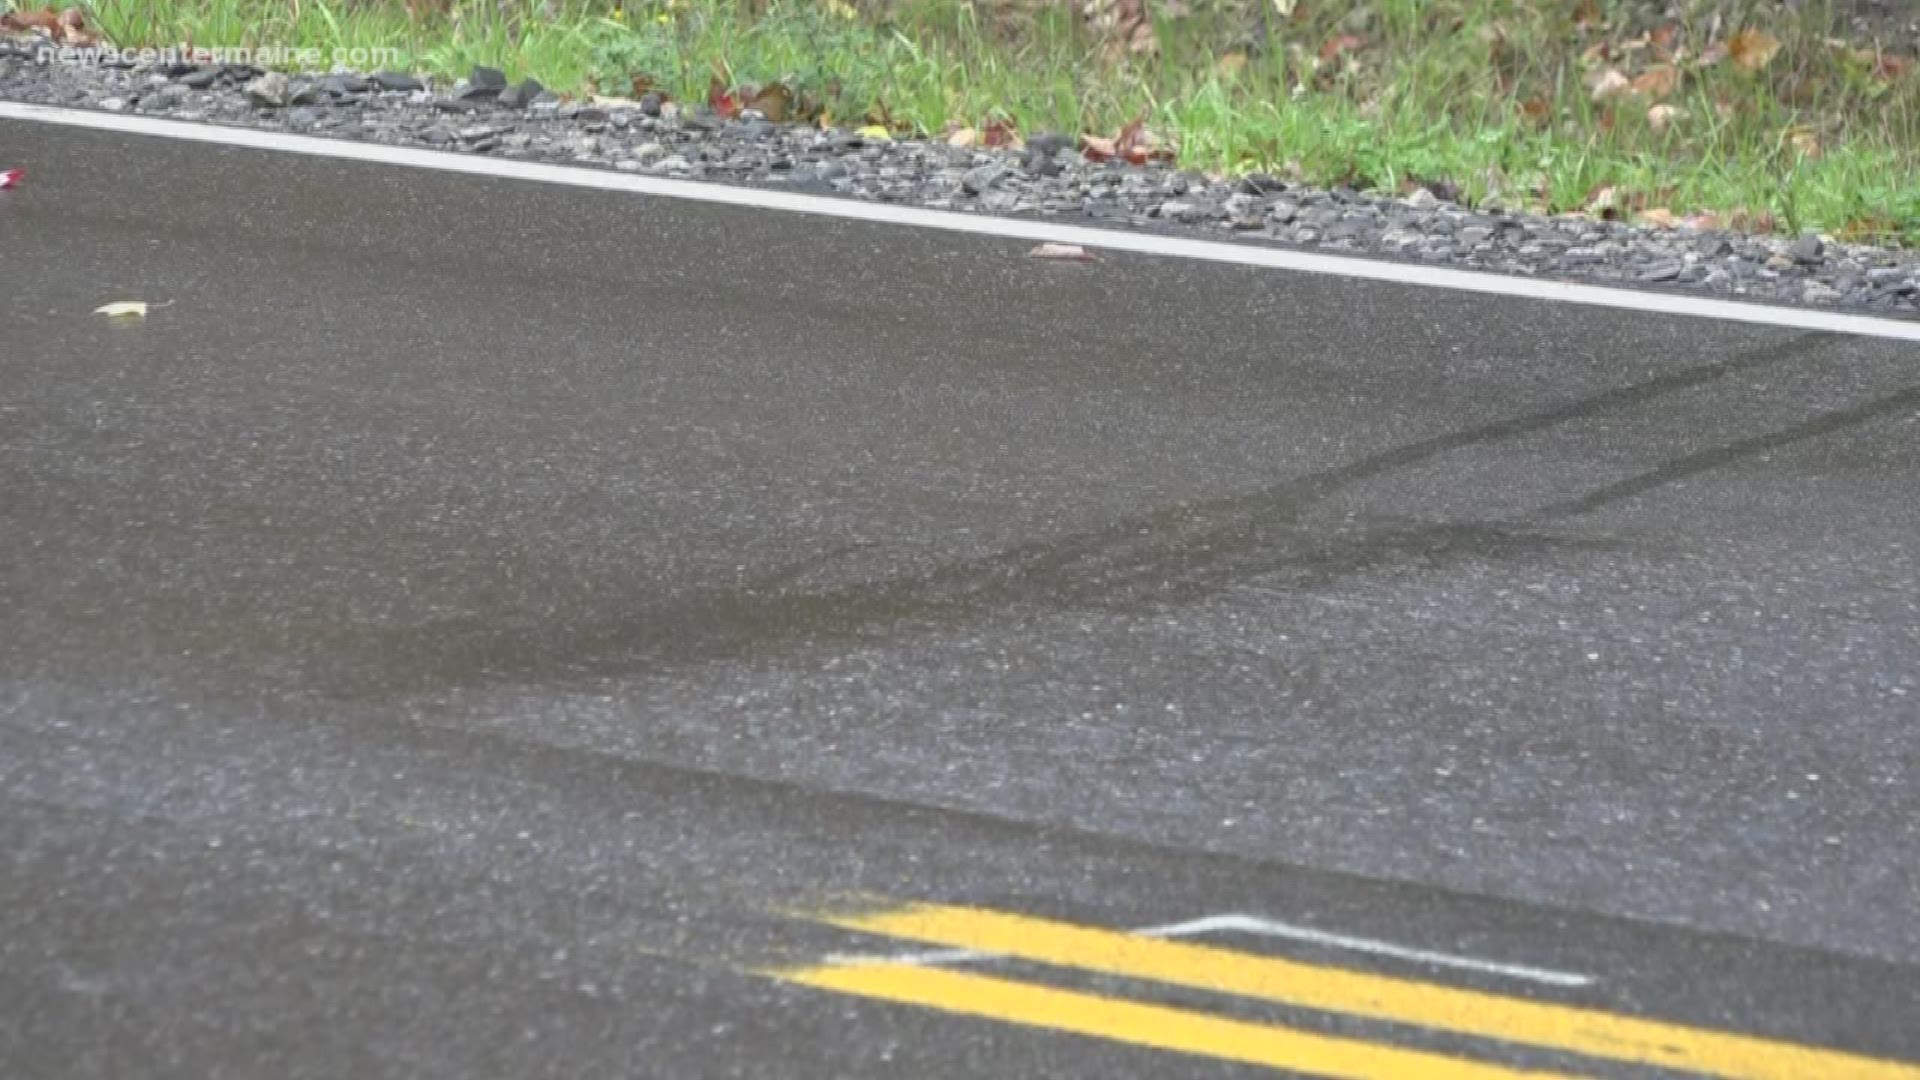 The Maine Department of Transportation has STOPPED it's use of a road sealant across the state following complaints of slippery conditions on Route 225 in the town o